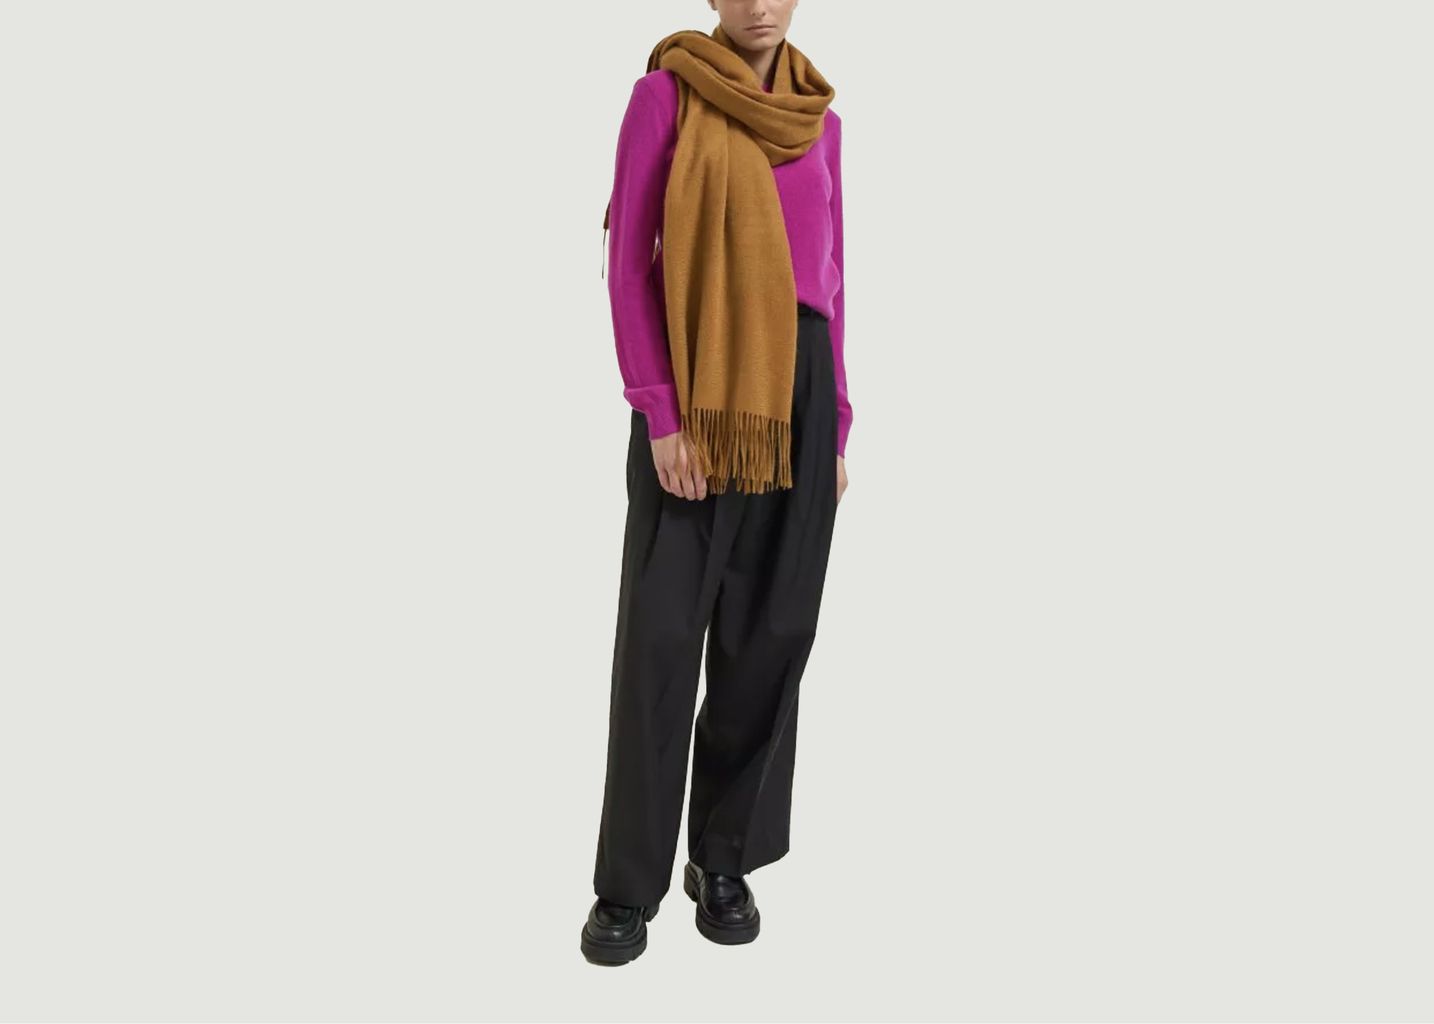 Ally cashmere scarf - Hircus